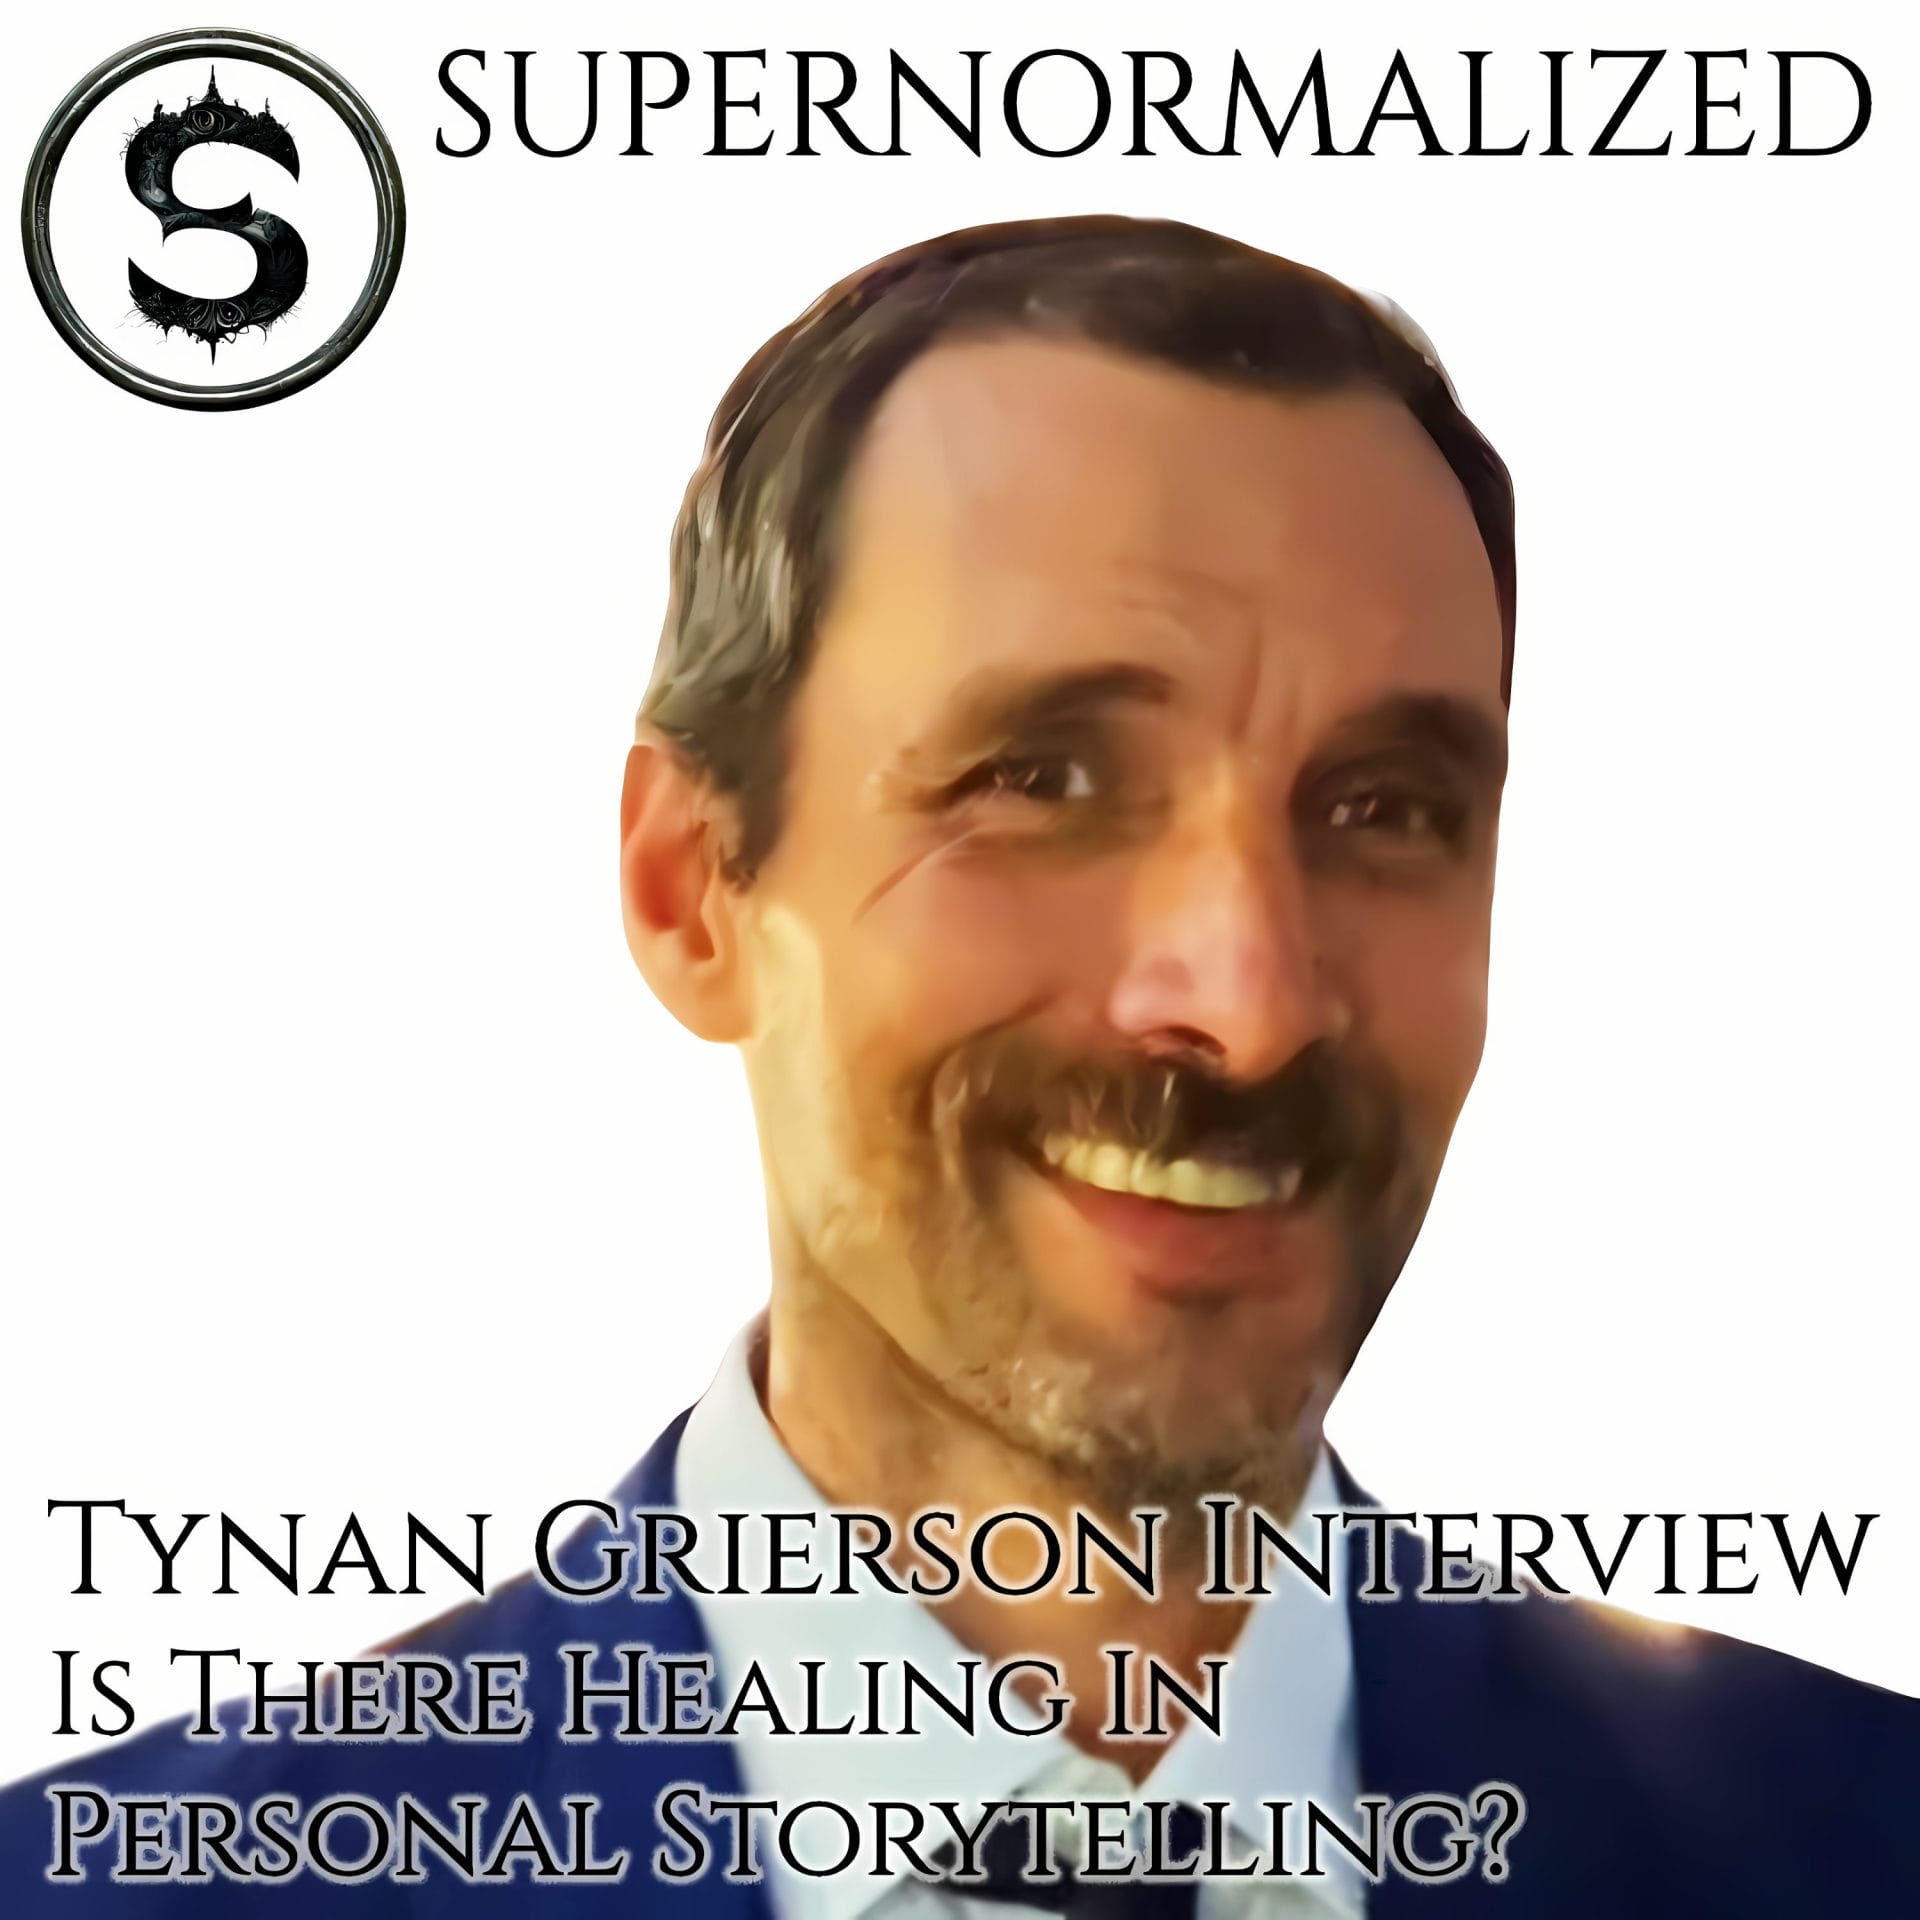 Tynan Grierson Interview Is There Healing In Personal Storytelling?